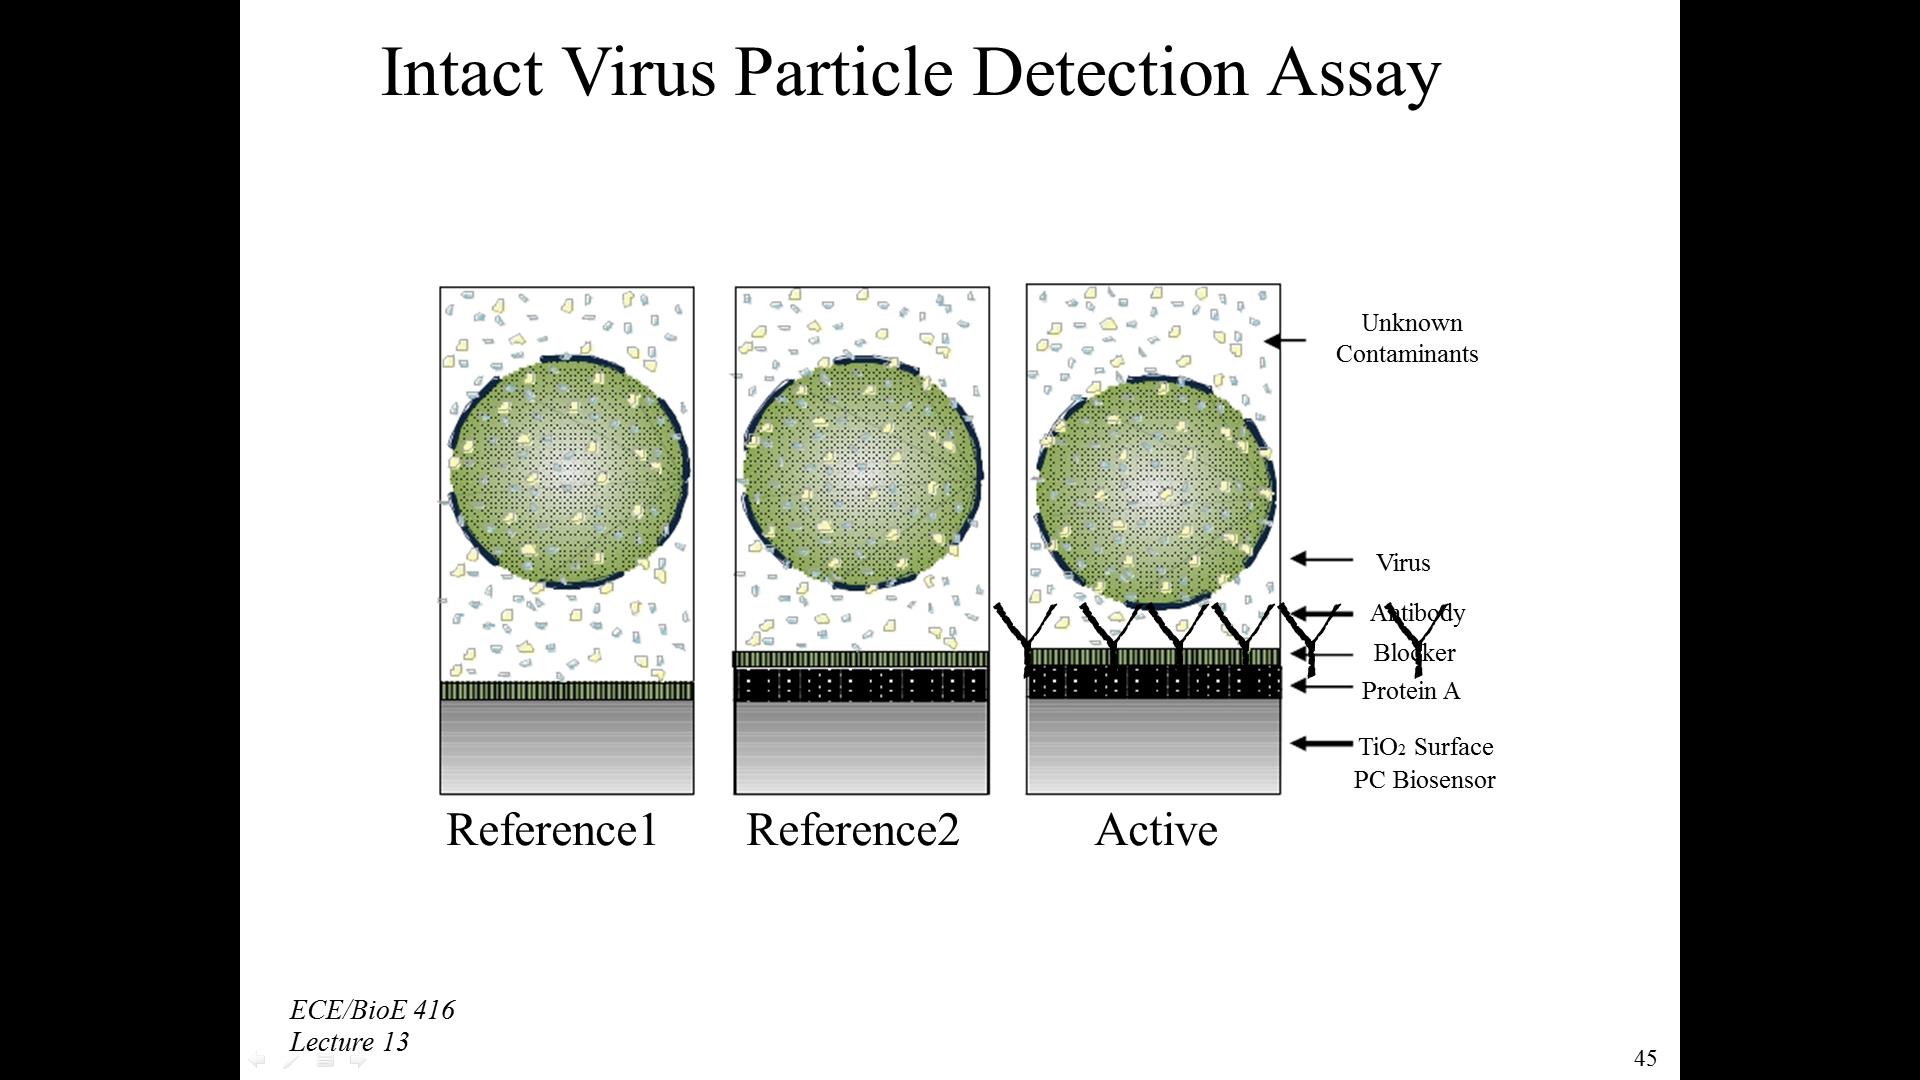 Intact Virus Particle Detection Assay